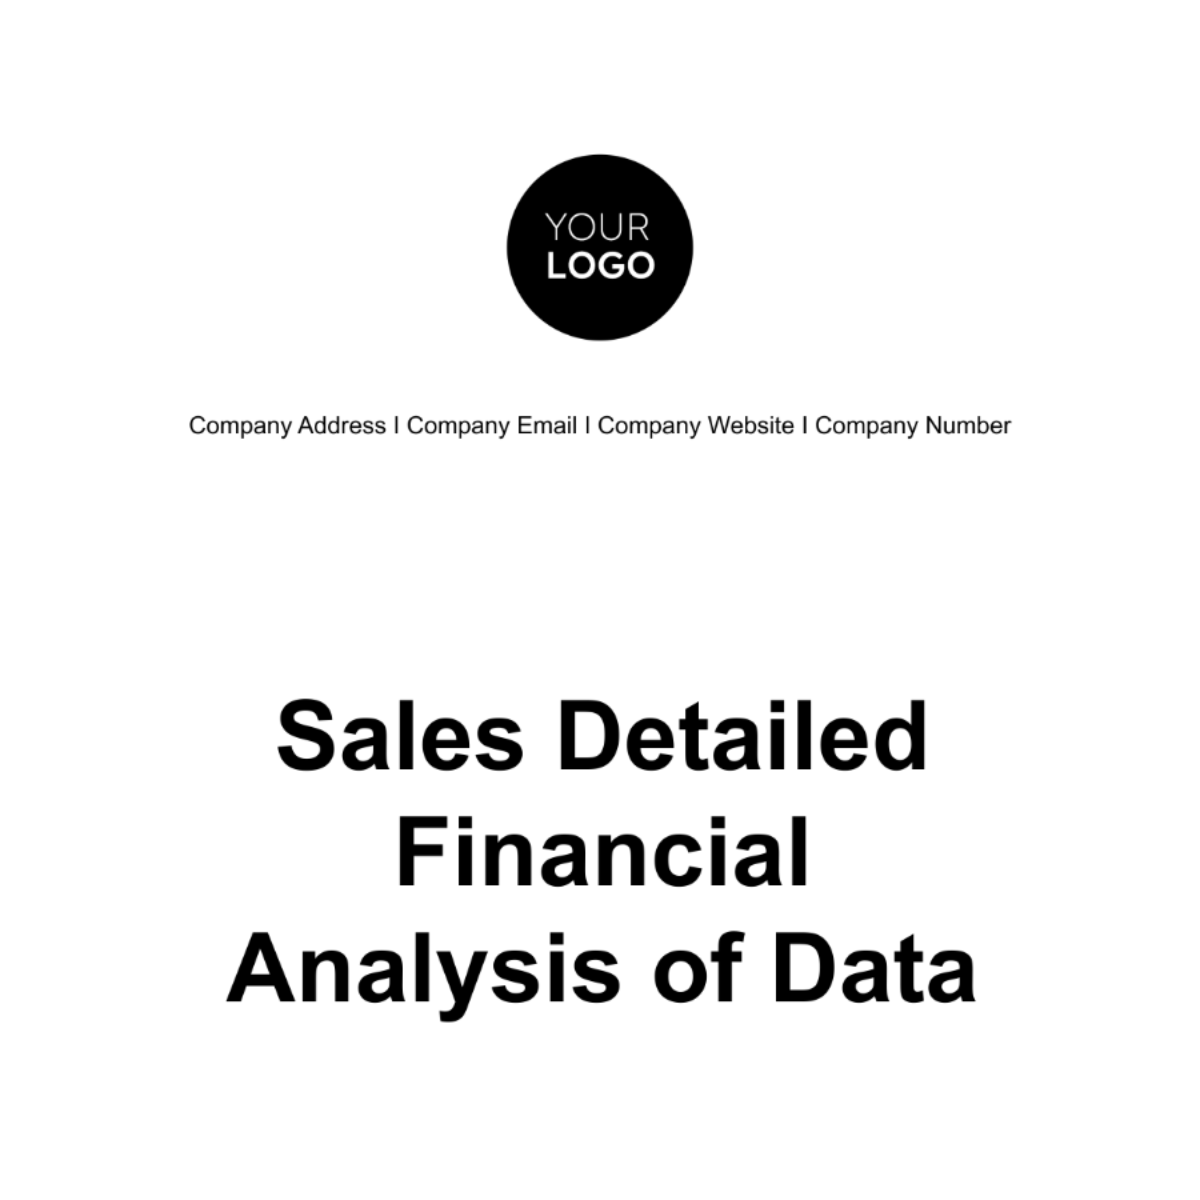 Free Sales Detailed Financial Analysis of Data Template